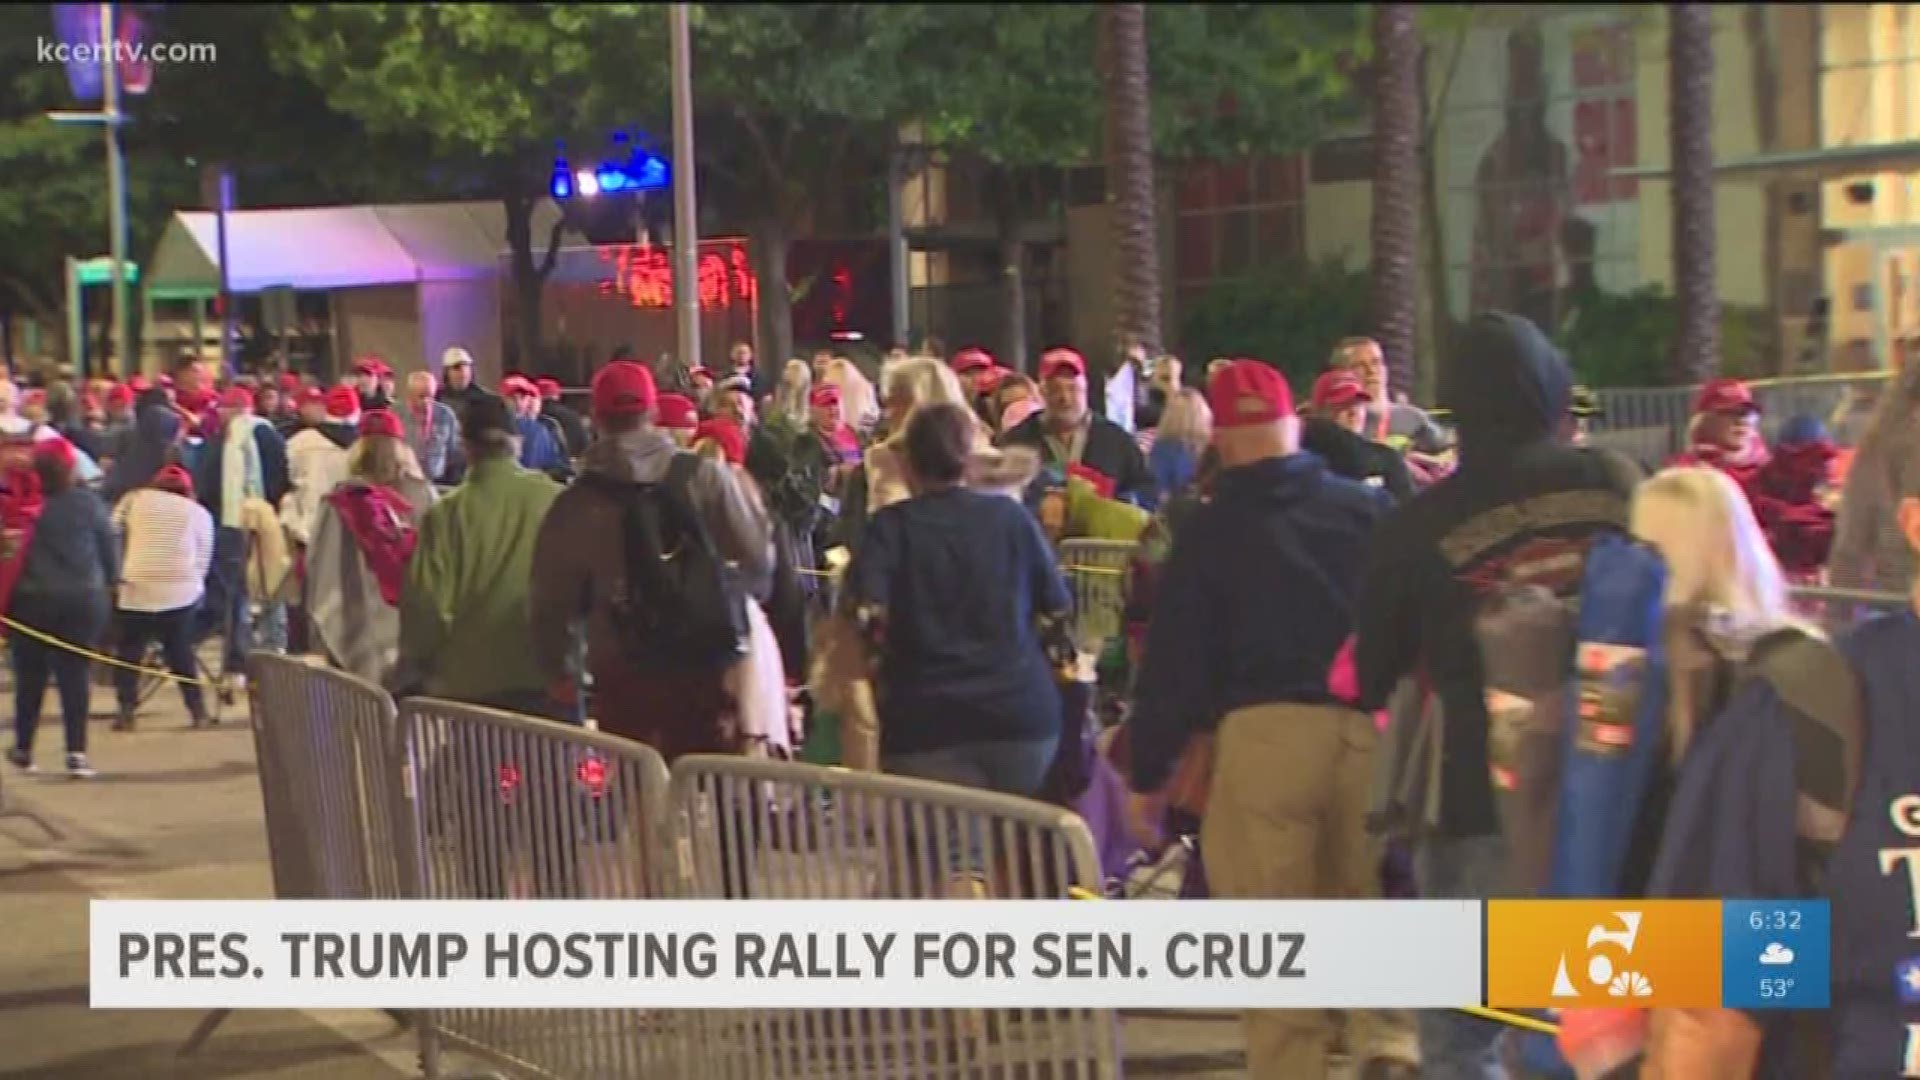 President Donald Trump is hosting a rally for Senator Ted Cruz on Monday at the Toyota Center in Downtown Houston where thousands are expected to be in attendance.